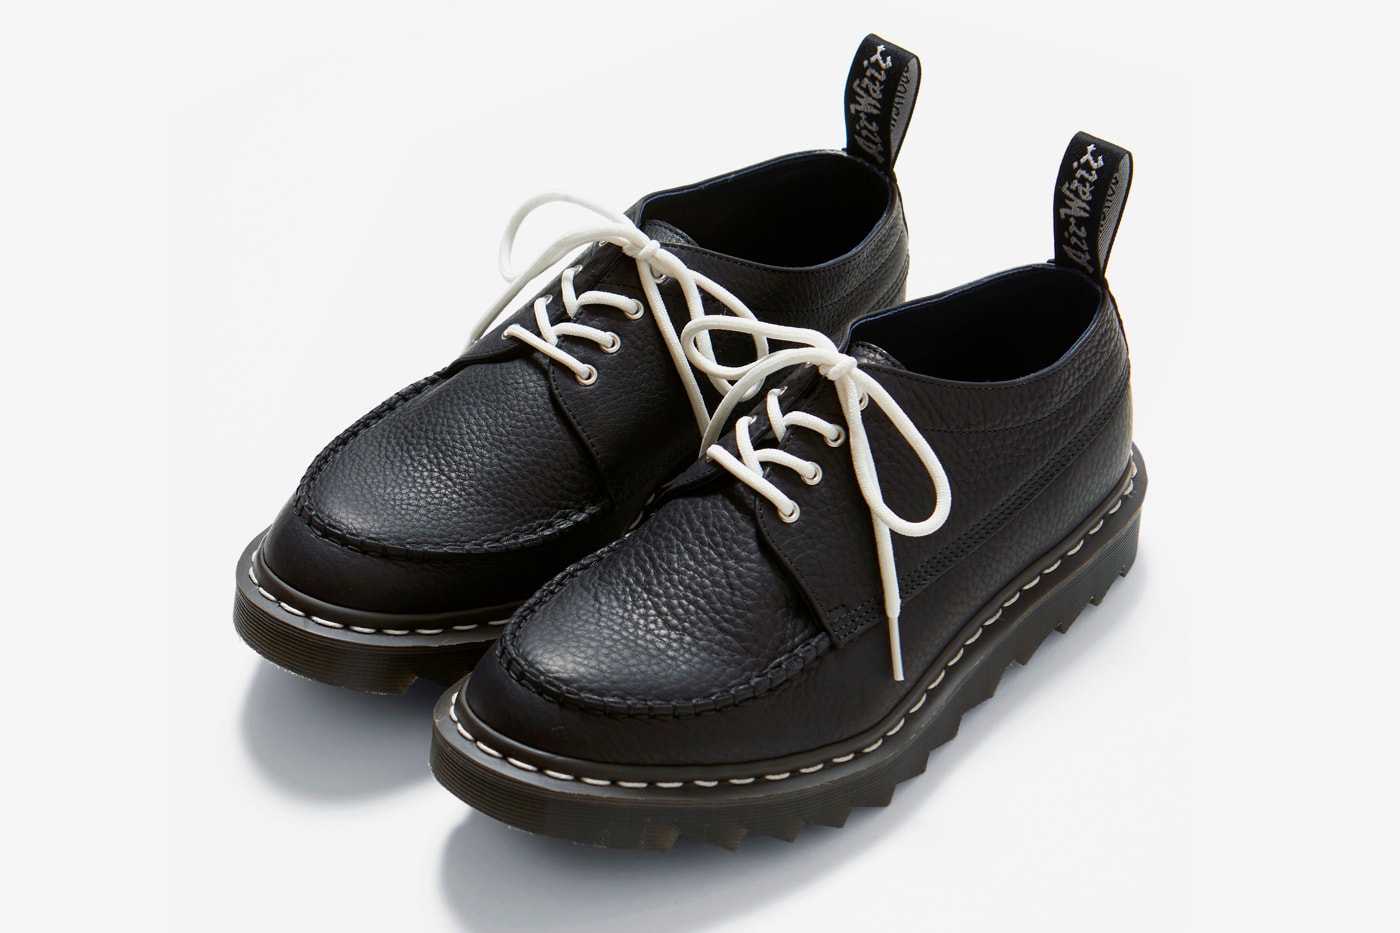 nanamica Dr Martens Camberwell MIE Black Brown nautical marine Japanese tokyo shoes footwear piece fine grain leather air cushioning ziggy sole grip traction tread stitching timeless classic vamp quarter